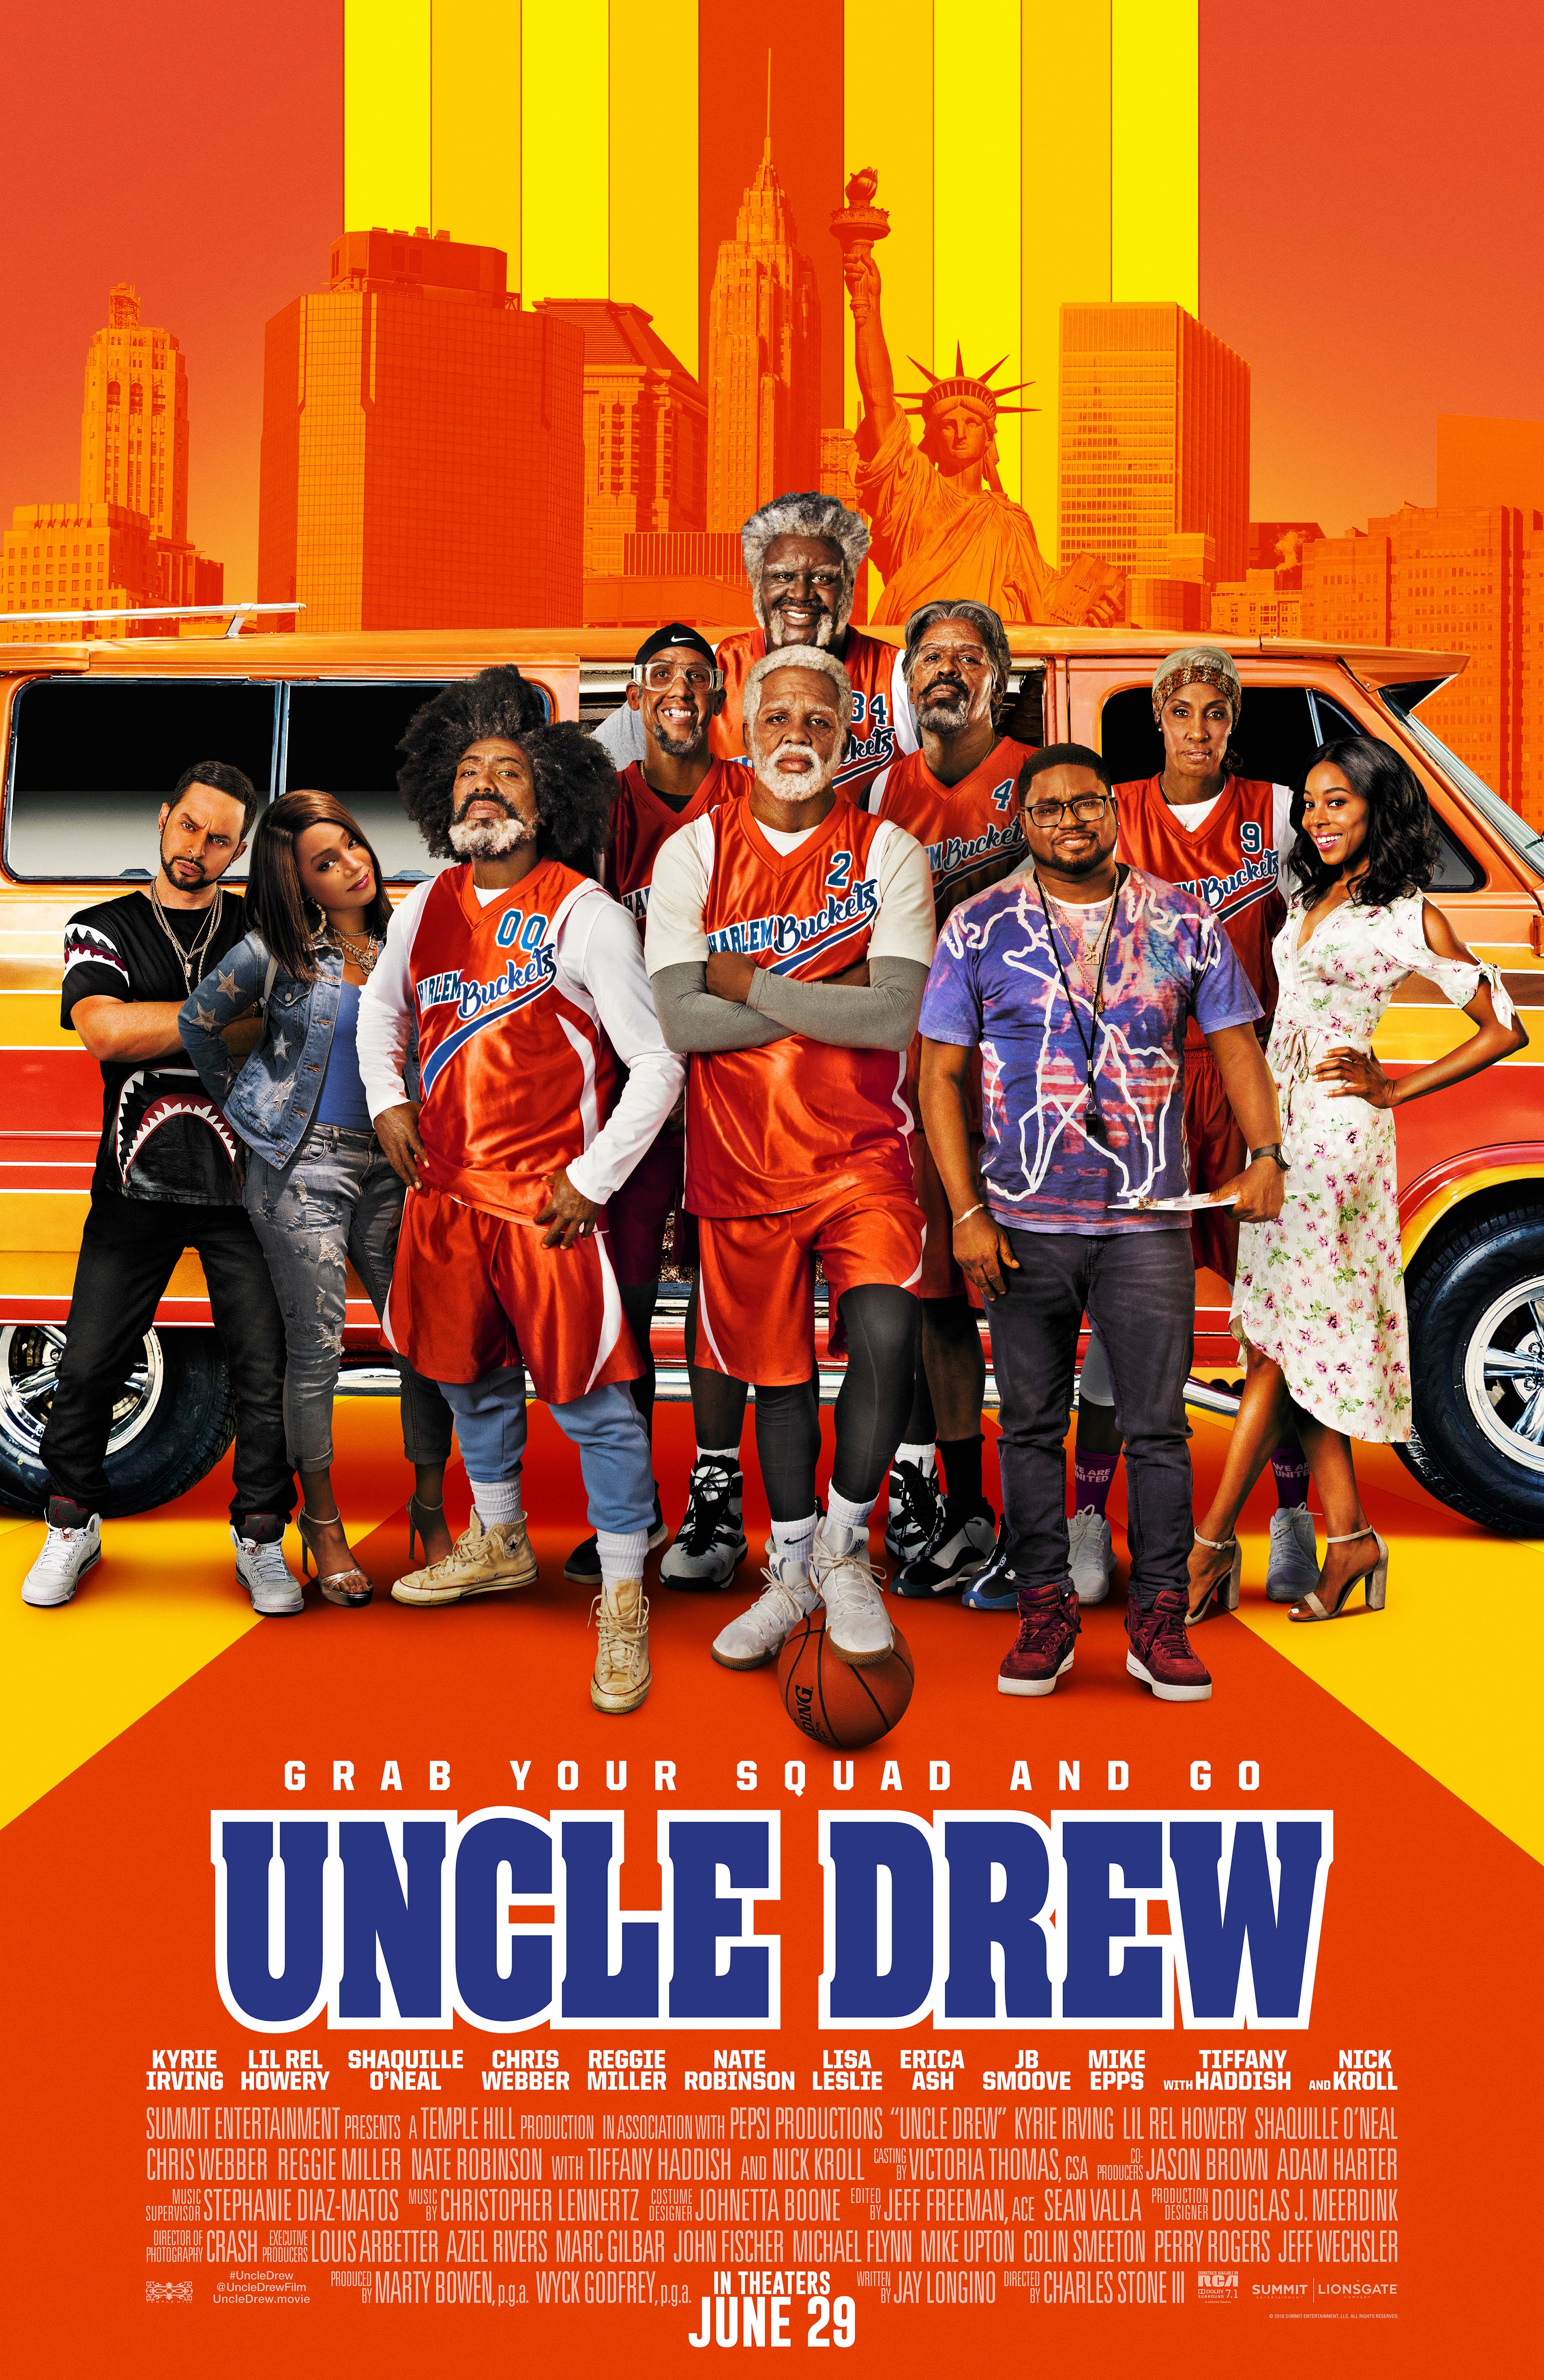 New Uncle Drew Featurette Released | Nothing But Geek3600 x 5550